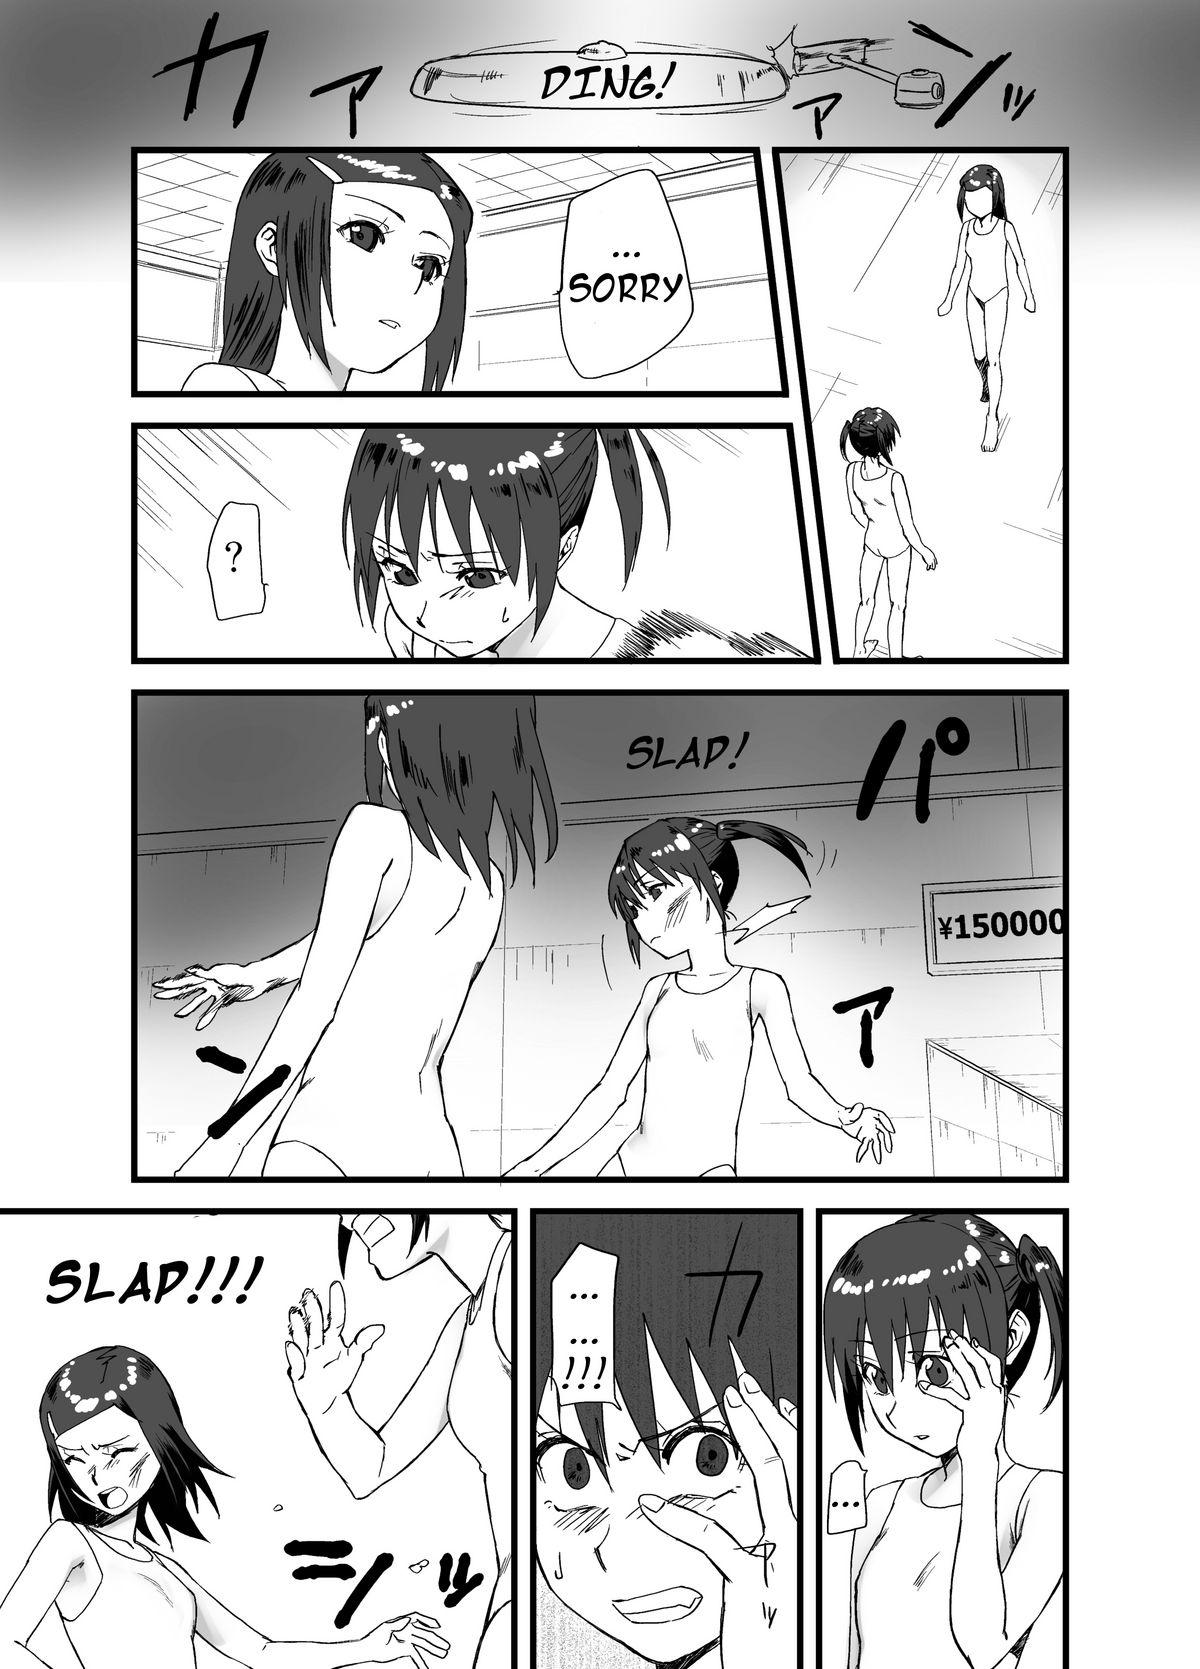 Pussy Fingering Lesfes-Co Chp 1 ENG Buttfucking - Page 5